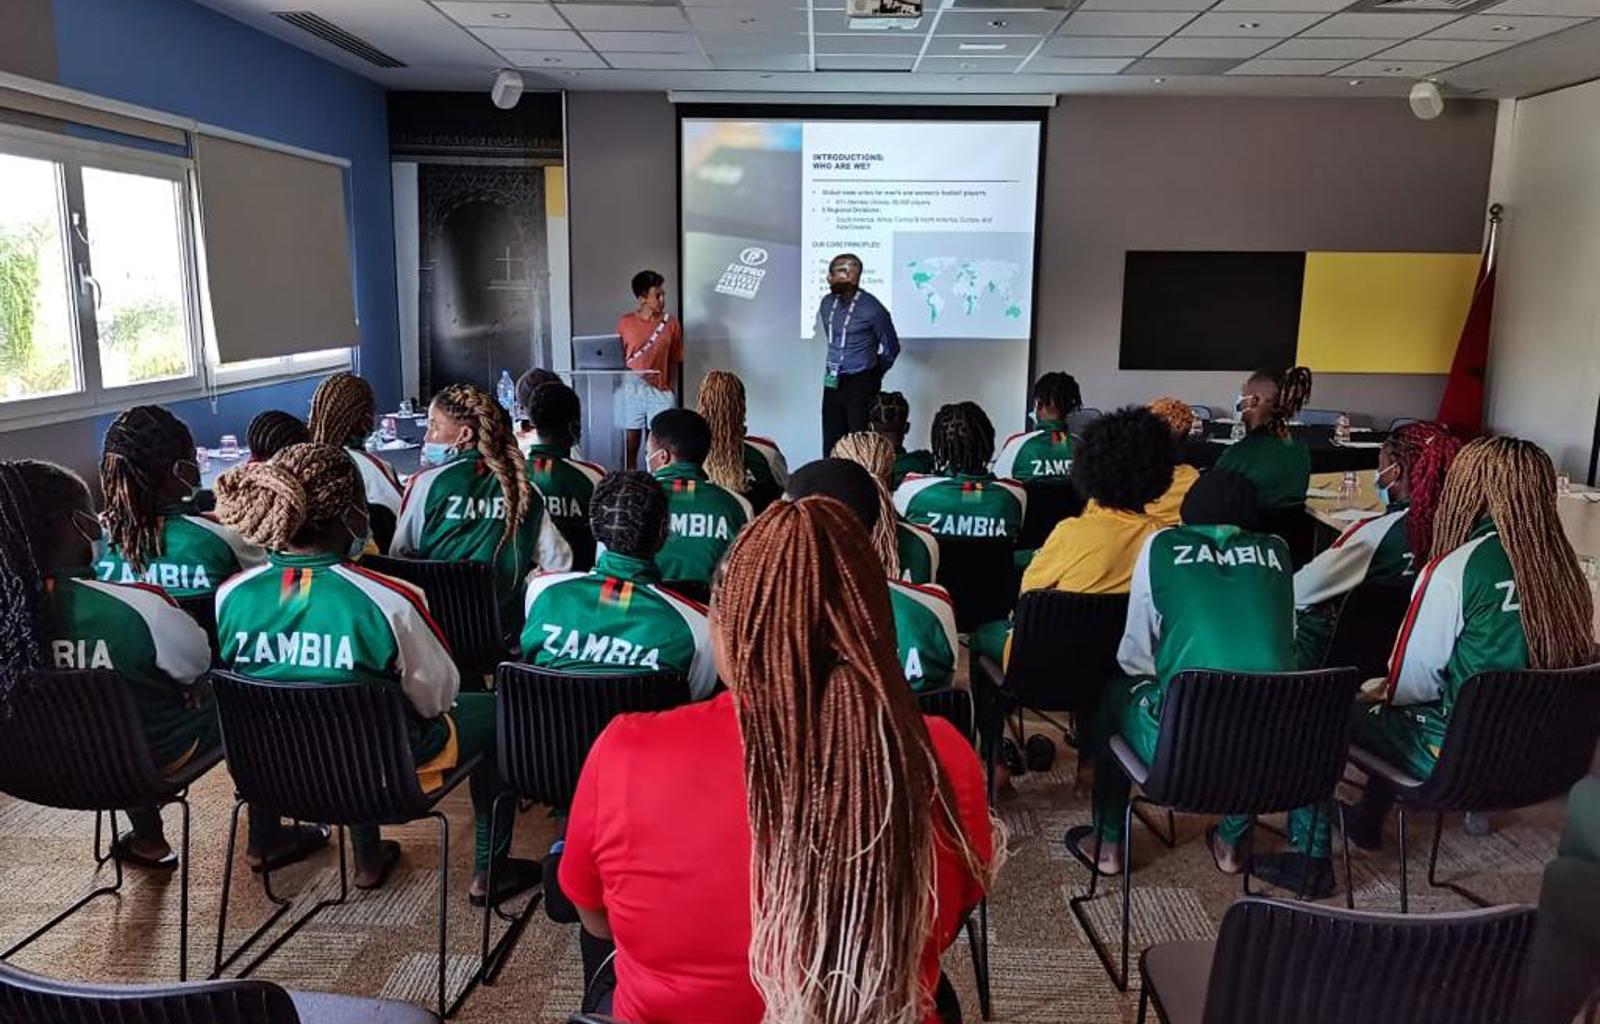 FIFPRO with Zambia women's national team